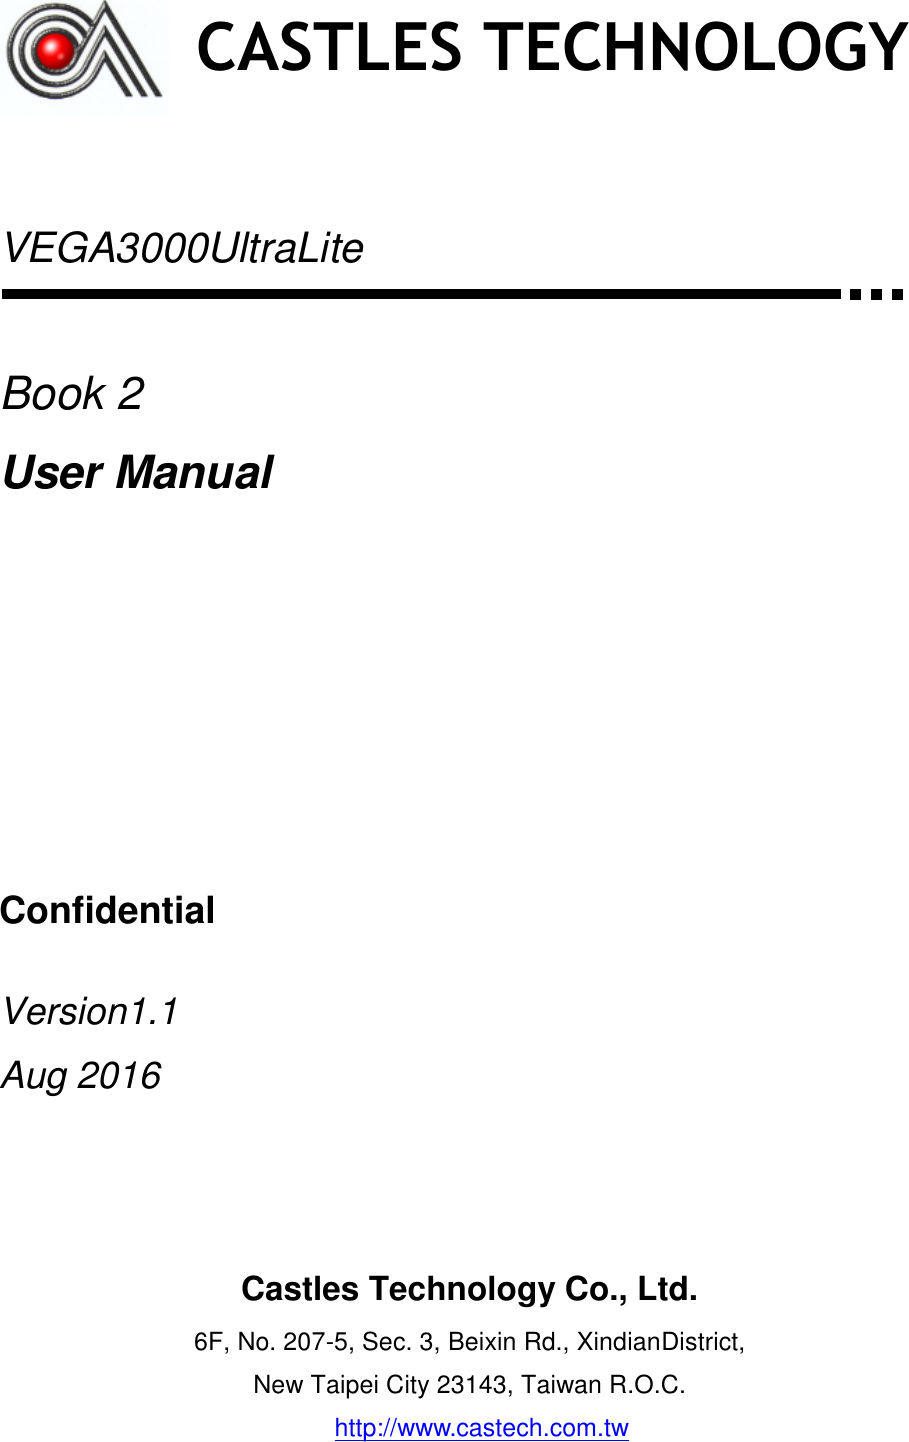     VEGA3000UltraLite   Book 2 User Manual       Confidential  Version1.1 Aug 2016      CASTLES TECHNOLOGY Castles Technology Co., Ltd. 6F, No. 207-5, Sec. 3, Beixin Rd., XindianDistrict, New Taipei City 23143, Taiwan R.O.C. http://www.castech.com.tw  